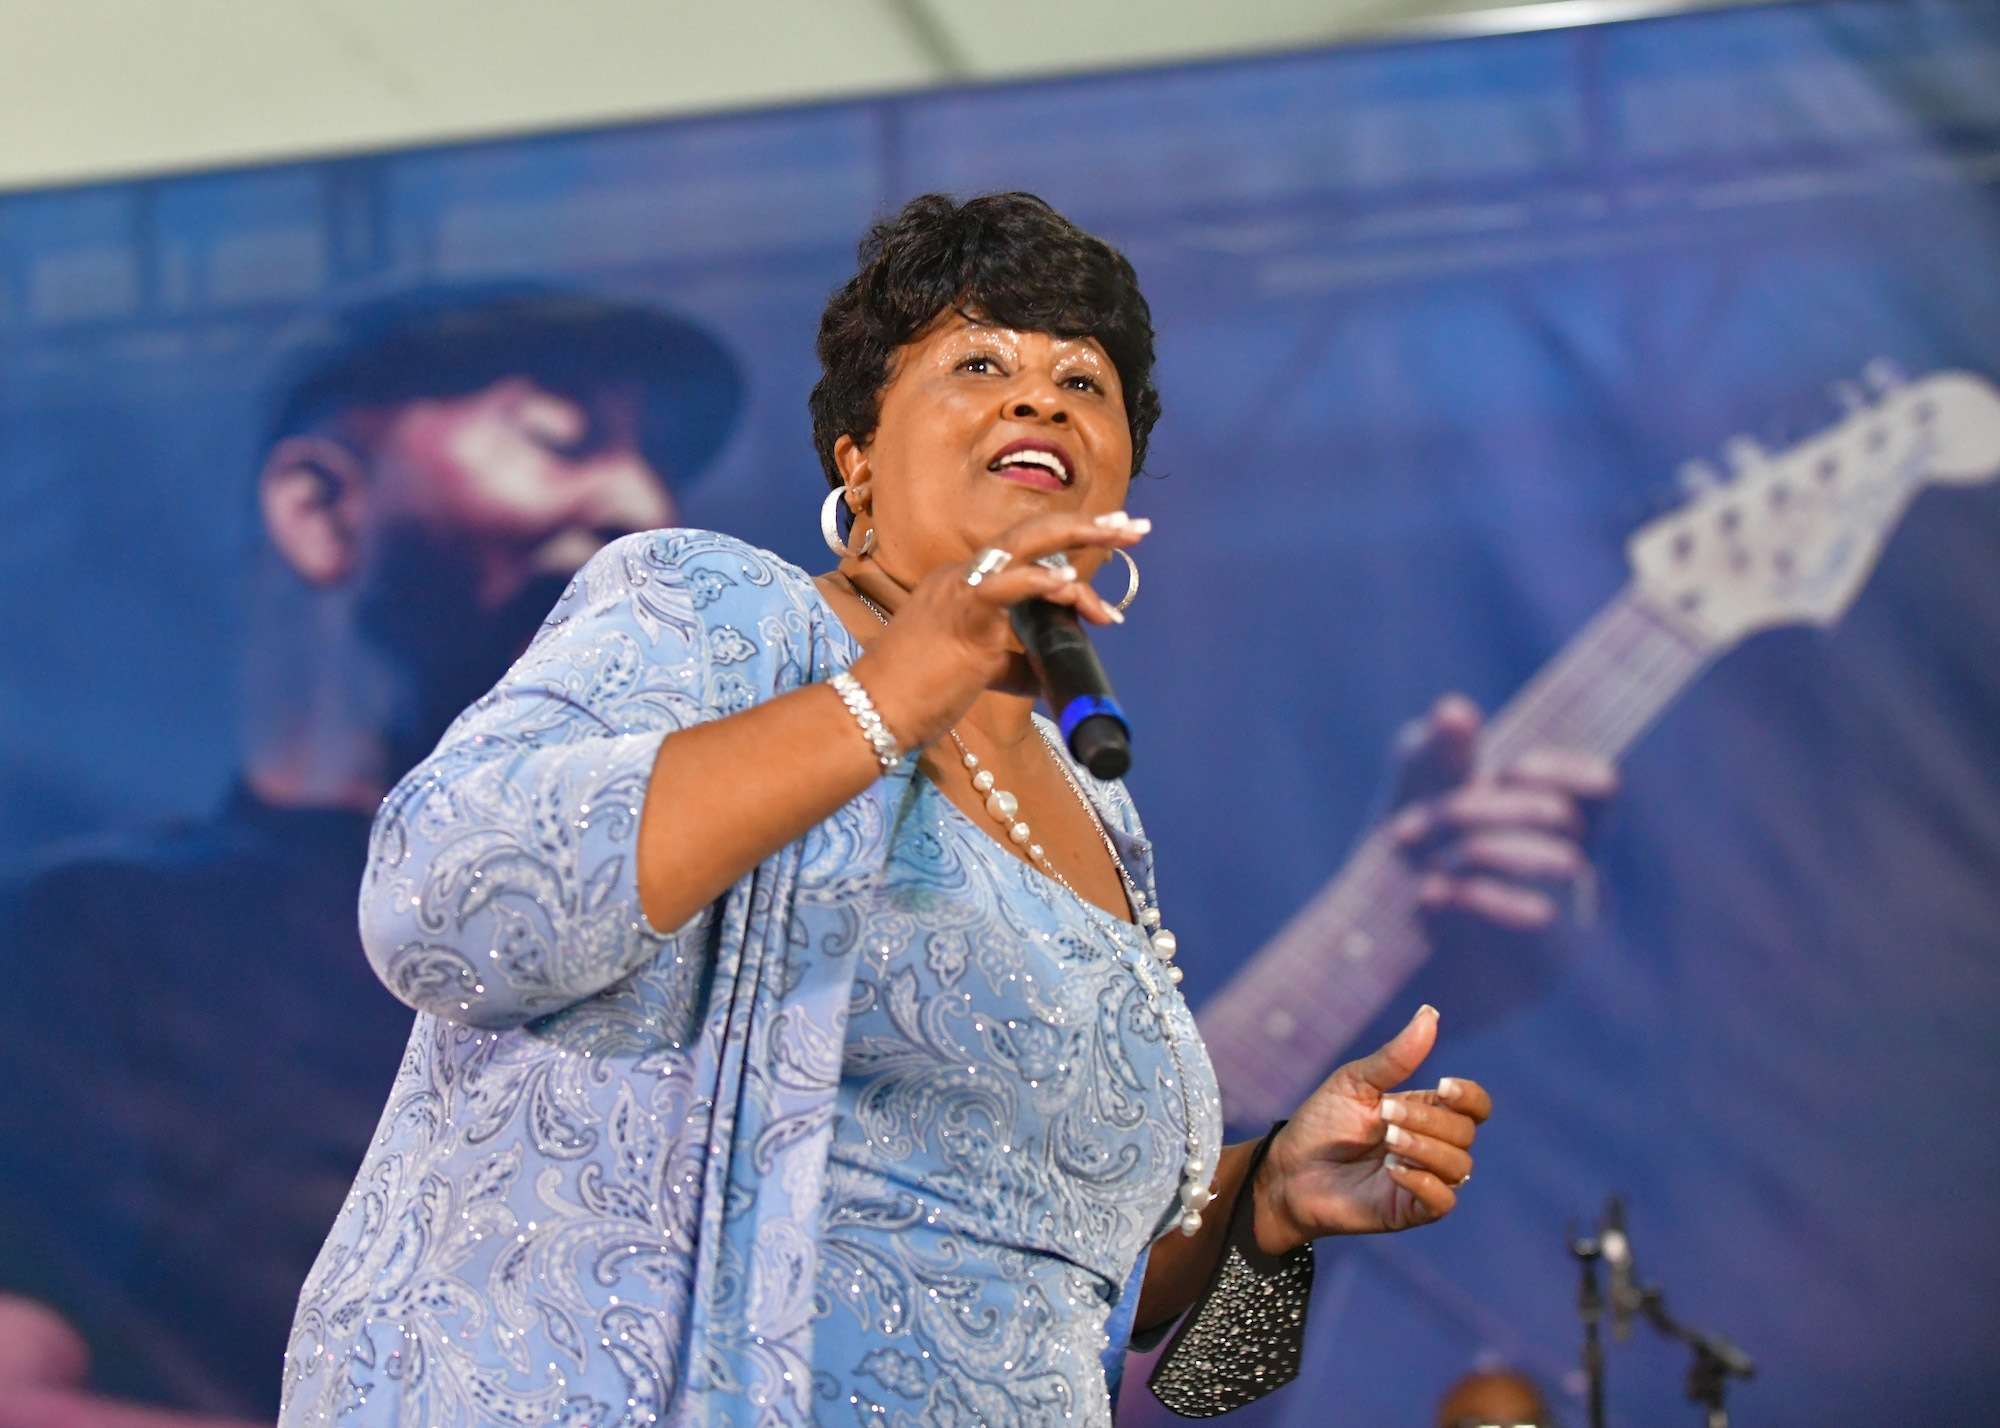 Ms Jody Live At Chicago Blues Fest [GALLERY] 3